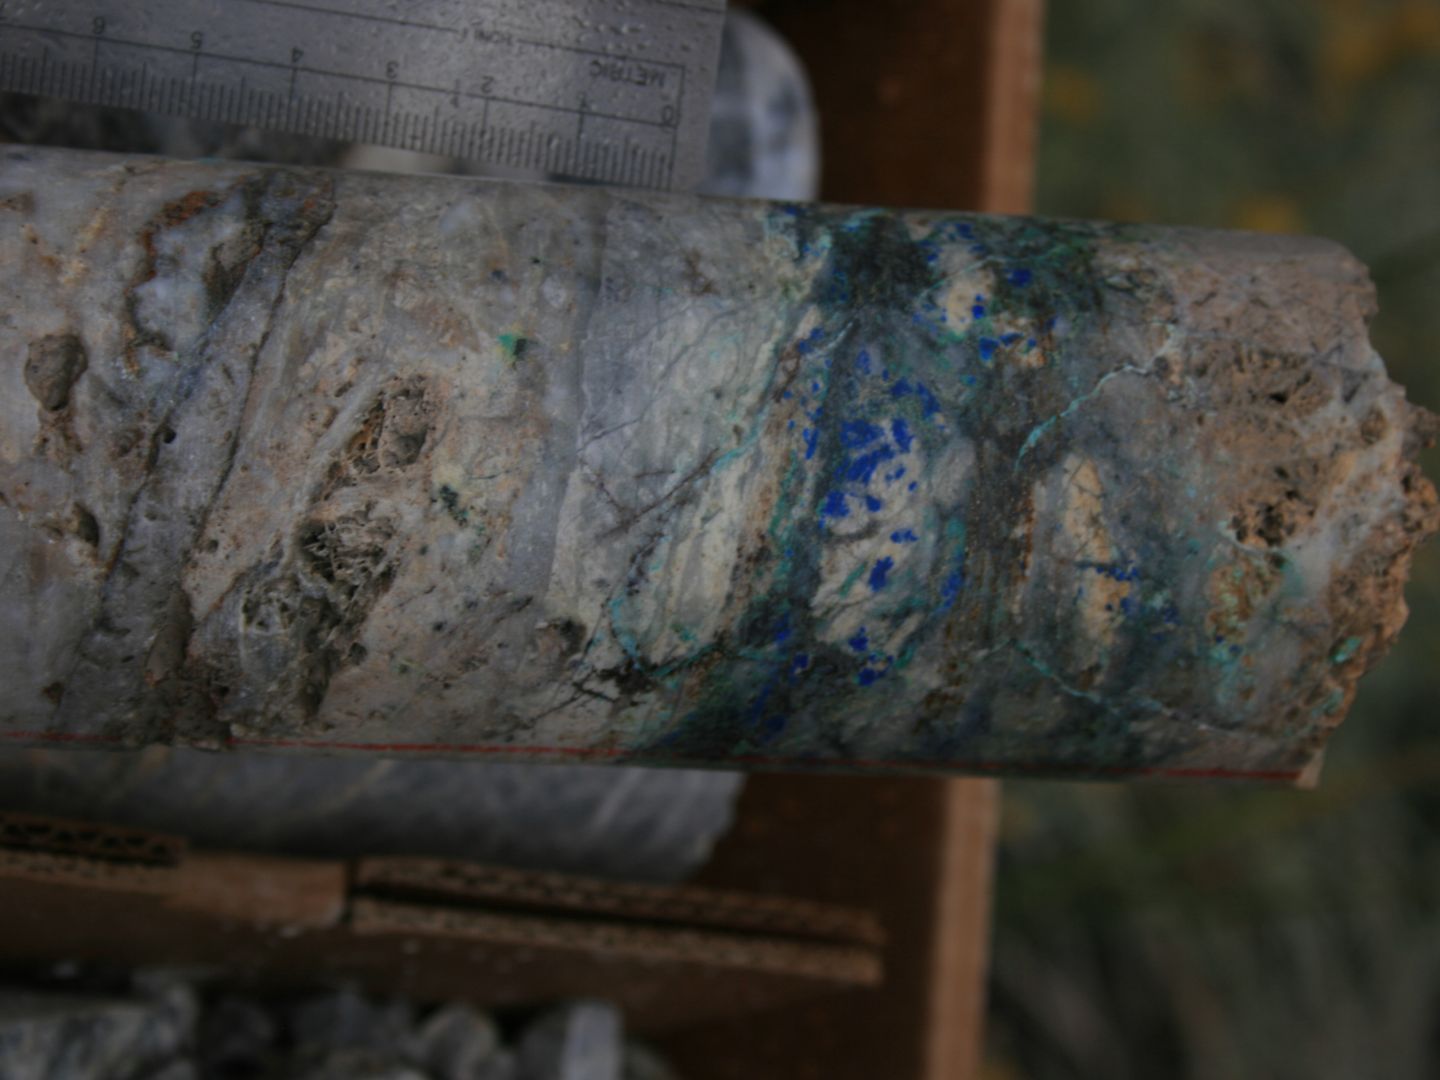 Secondary Copper Materials in 15SRDD002 at 172m